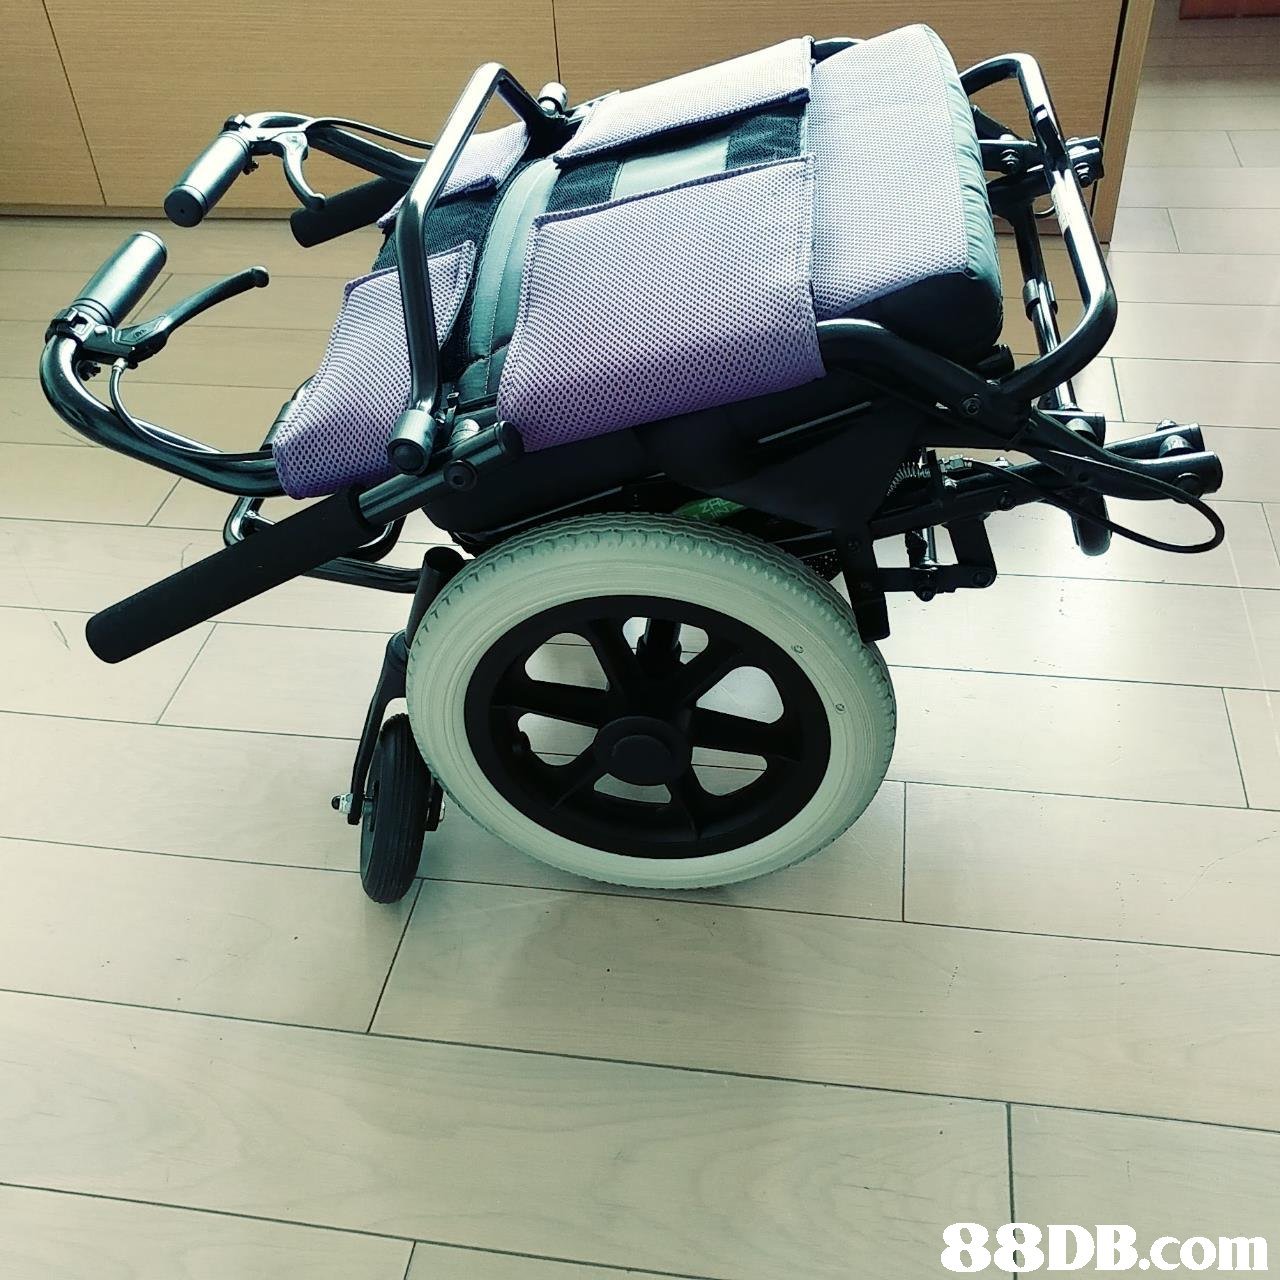   motor vehicle,product,mode of transport,wheelchair,automotive design